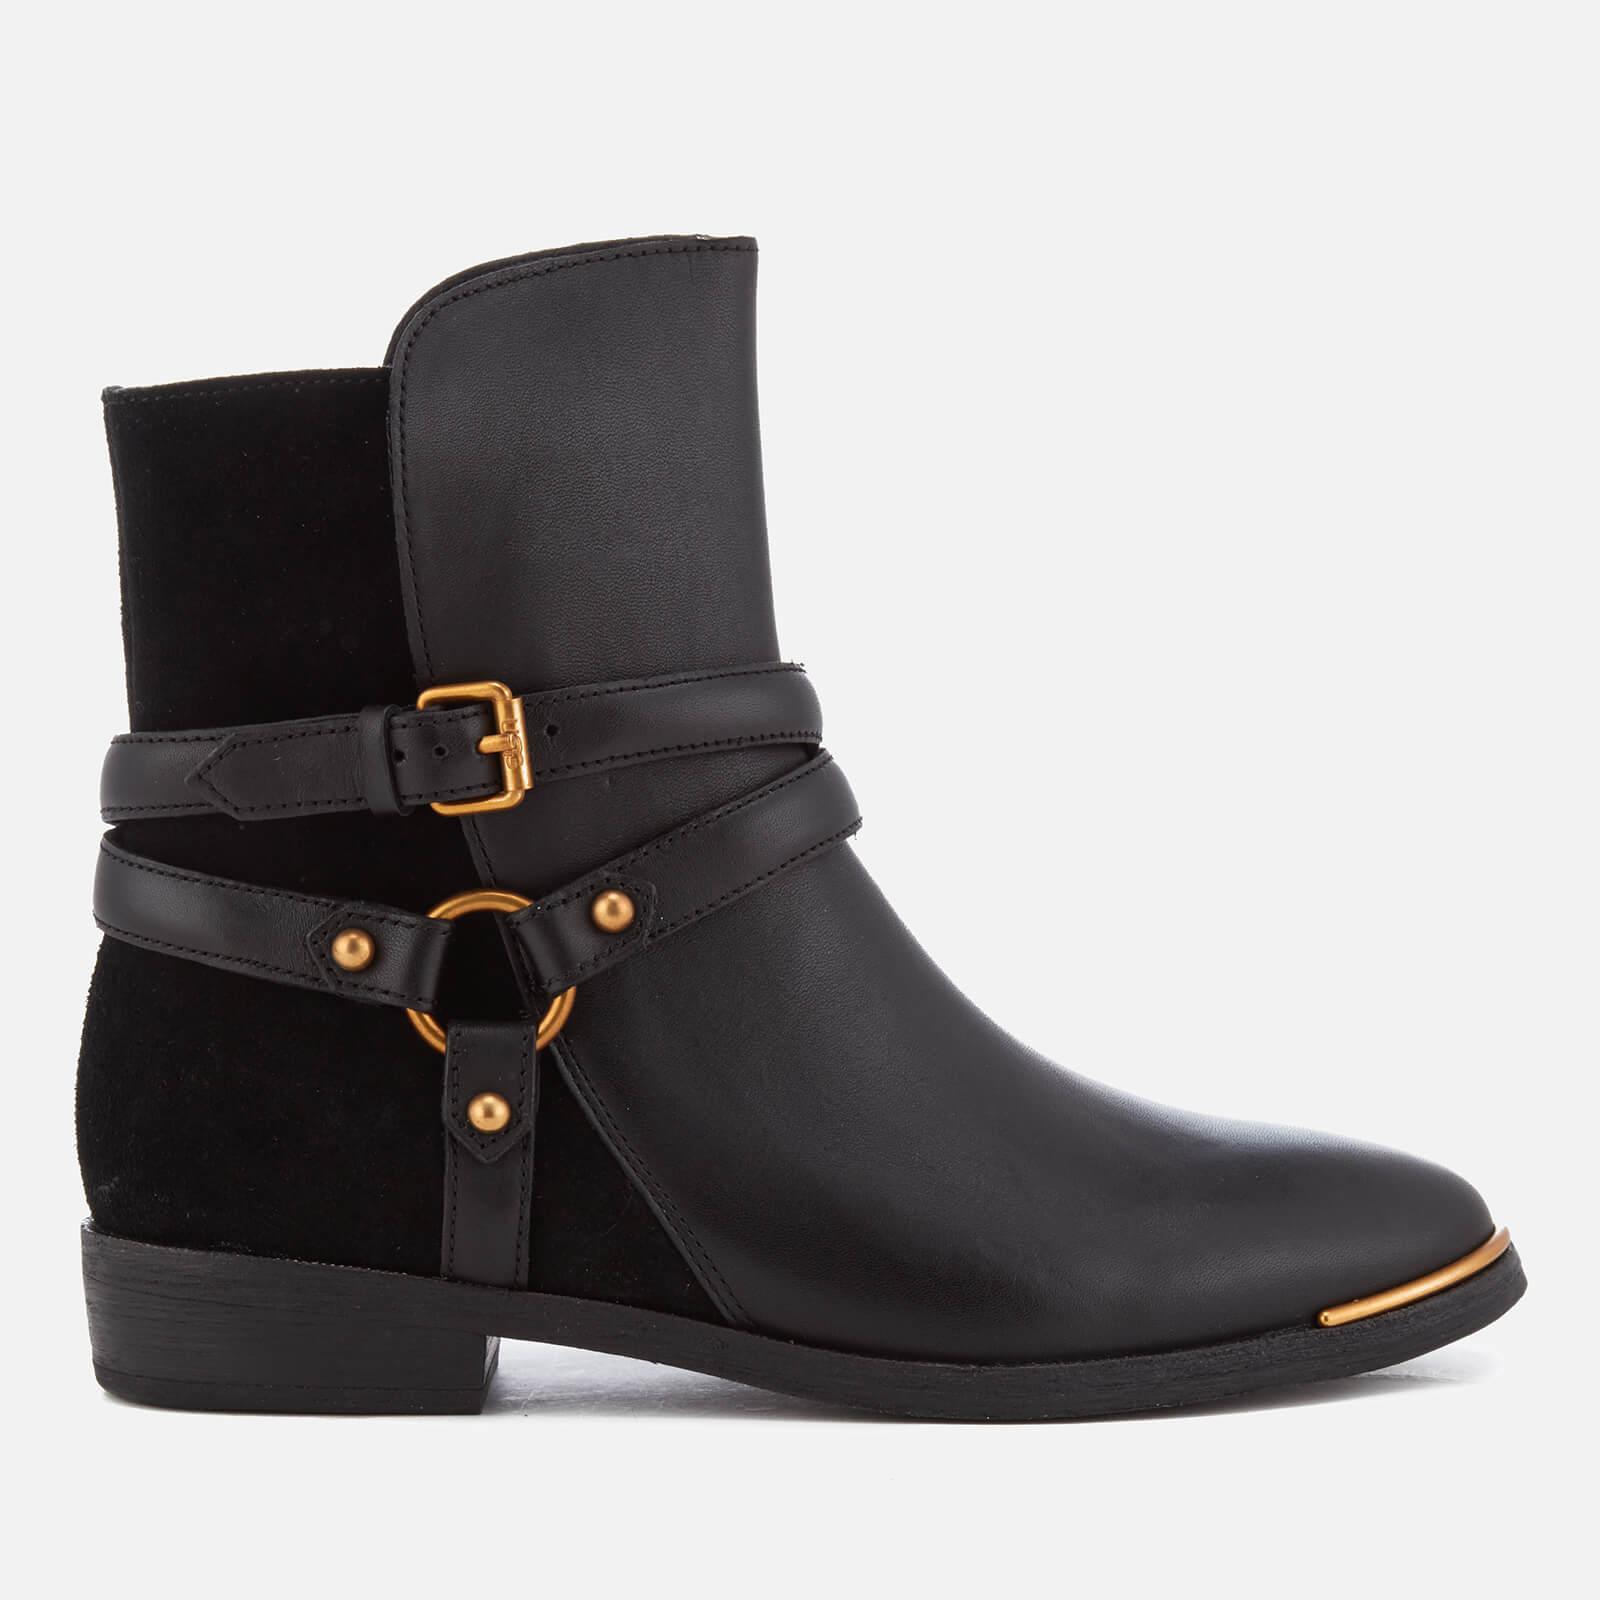 Lyst - Ugg Women's Kelby Leather Ankle Boots in Black